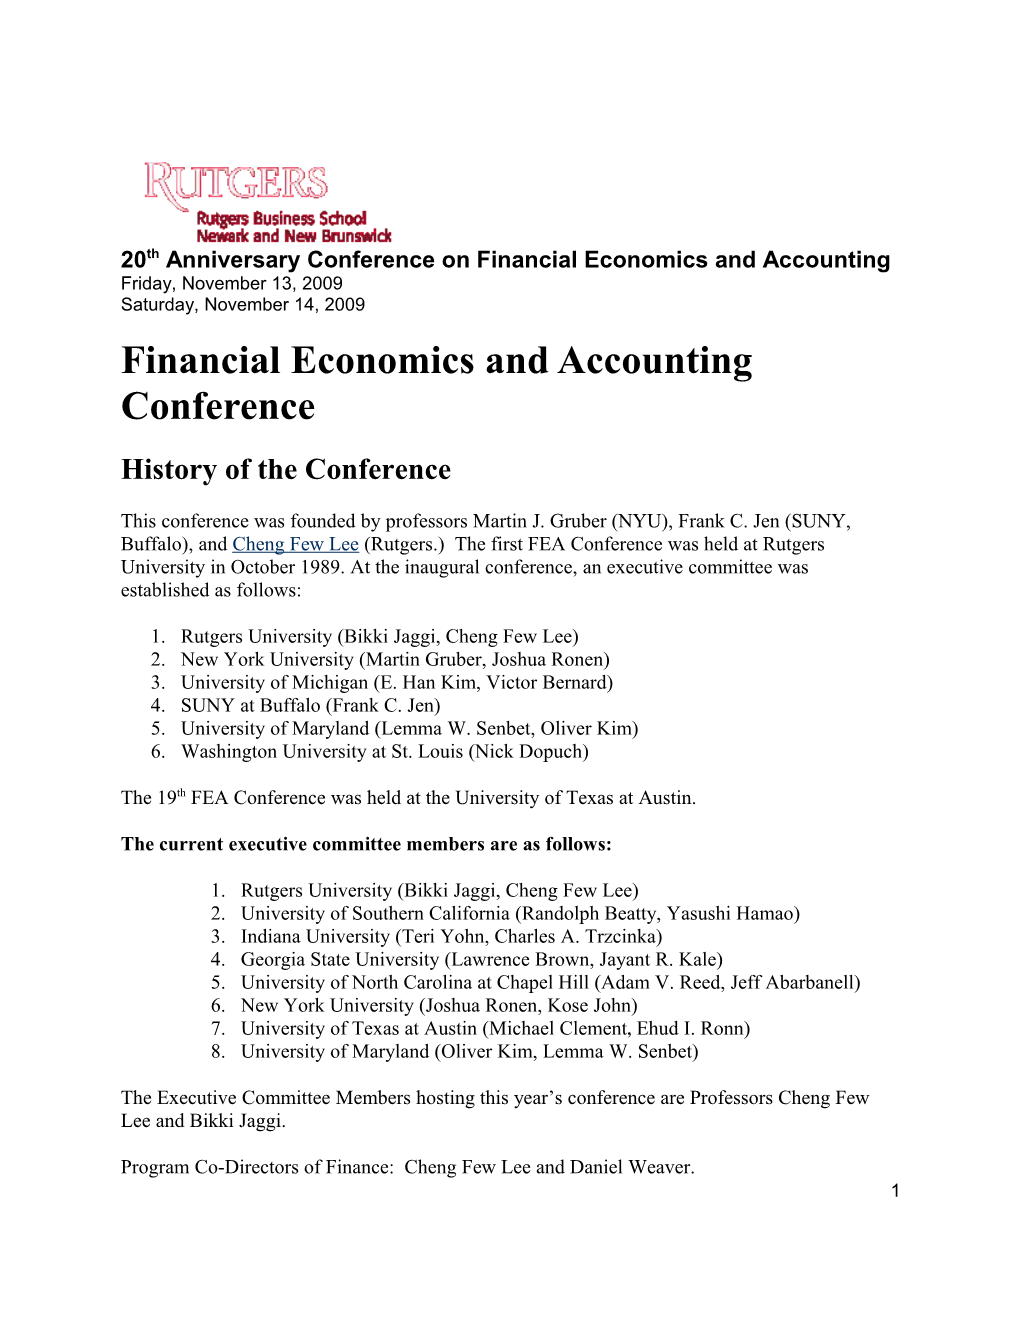 Financial Economics and Accounting Conference